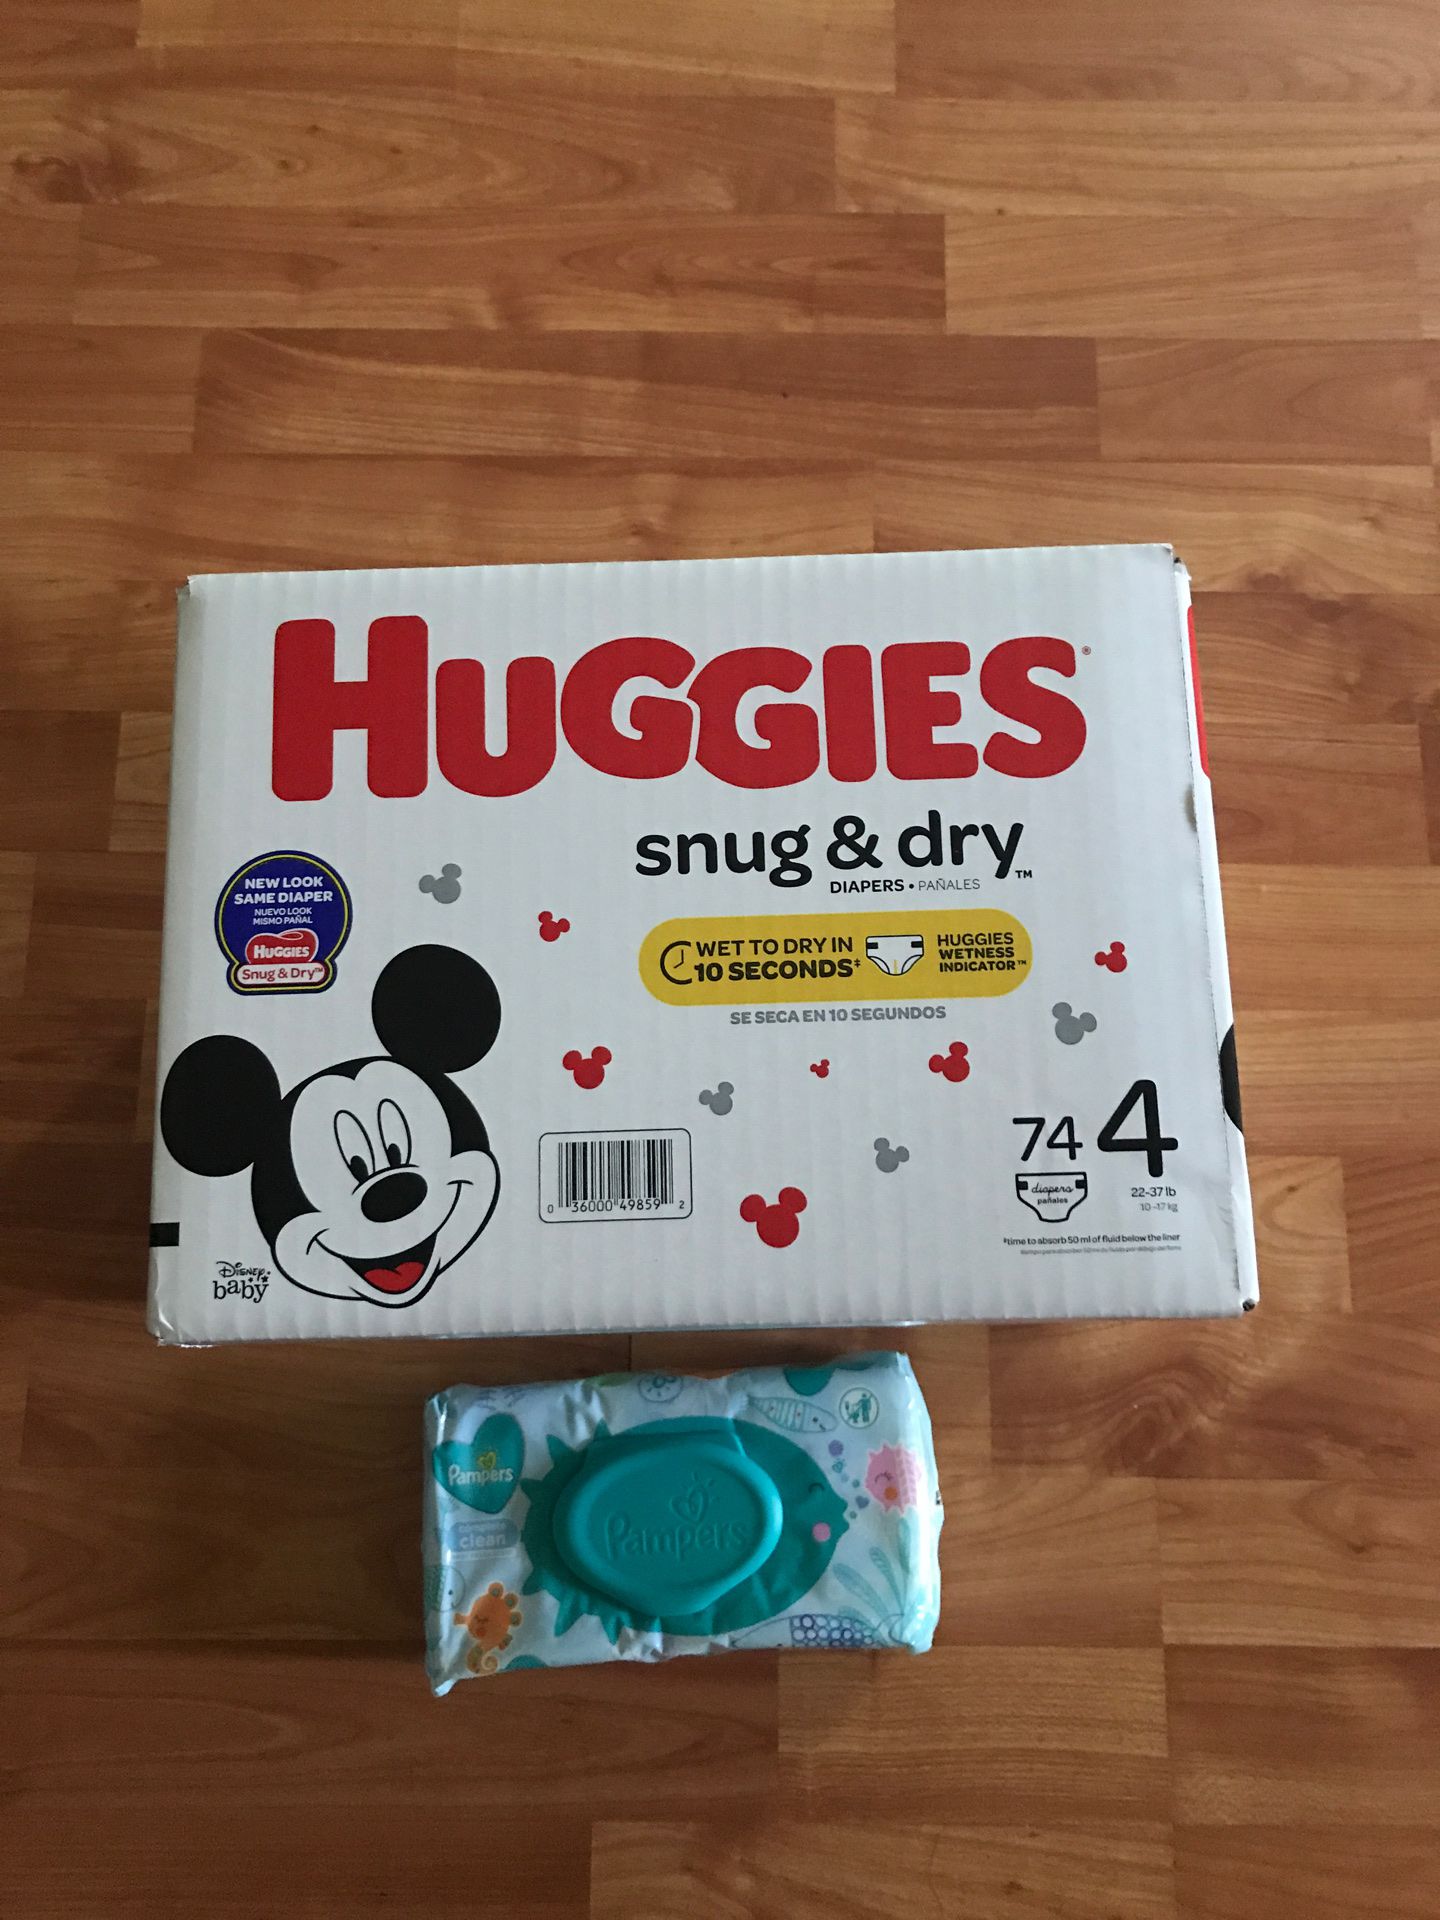 Huggies and pampers wipes